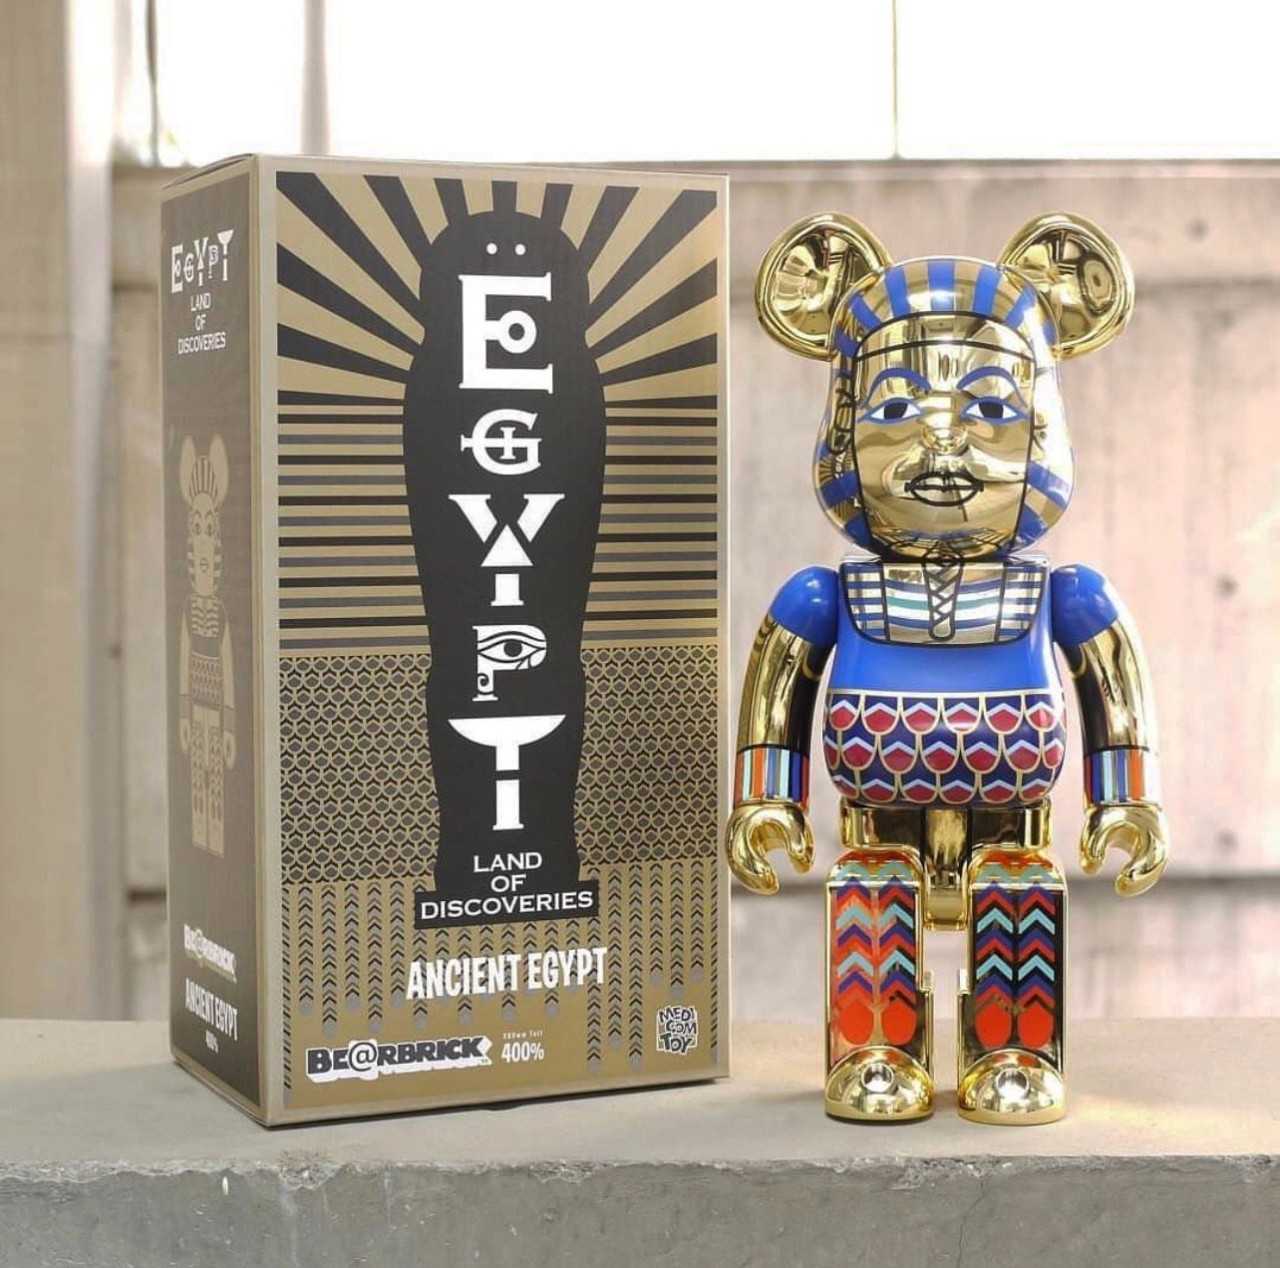 Be@rbrick Ancient Egypt 400% | LINE SHOPPING